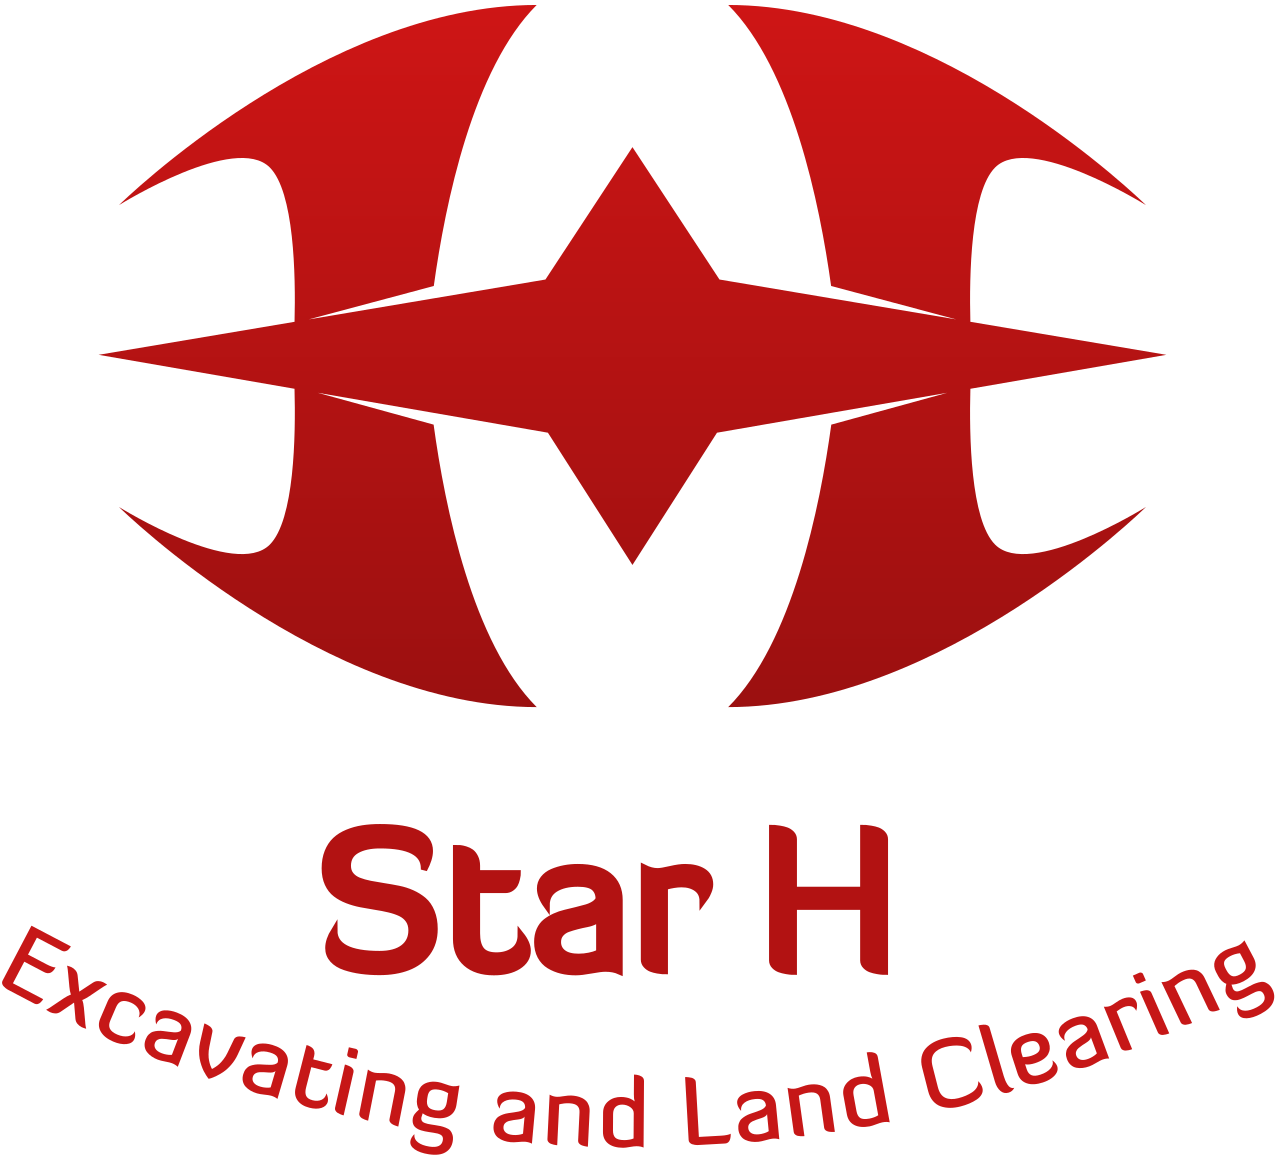 Excavating, Land Clearing, Dirt Work's web page